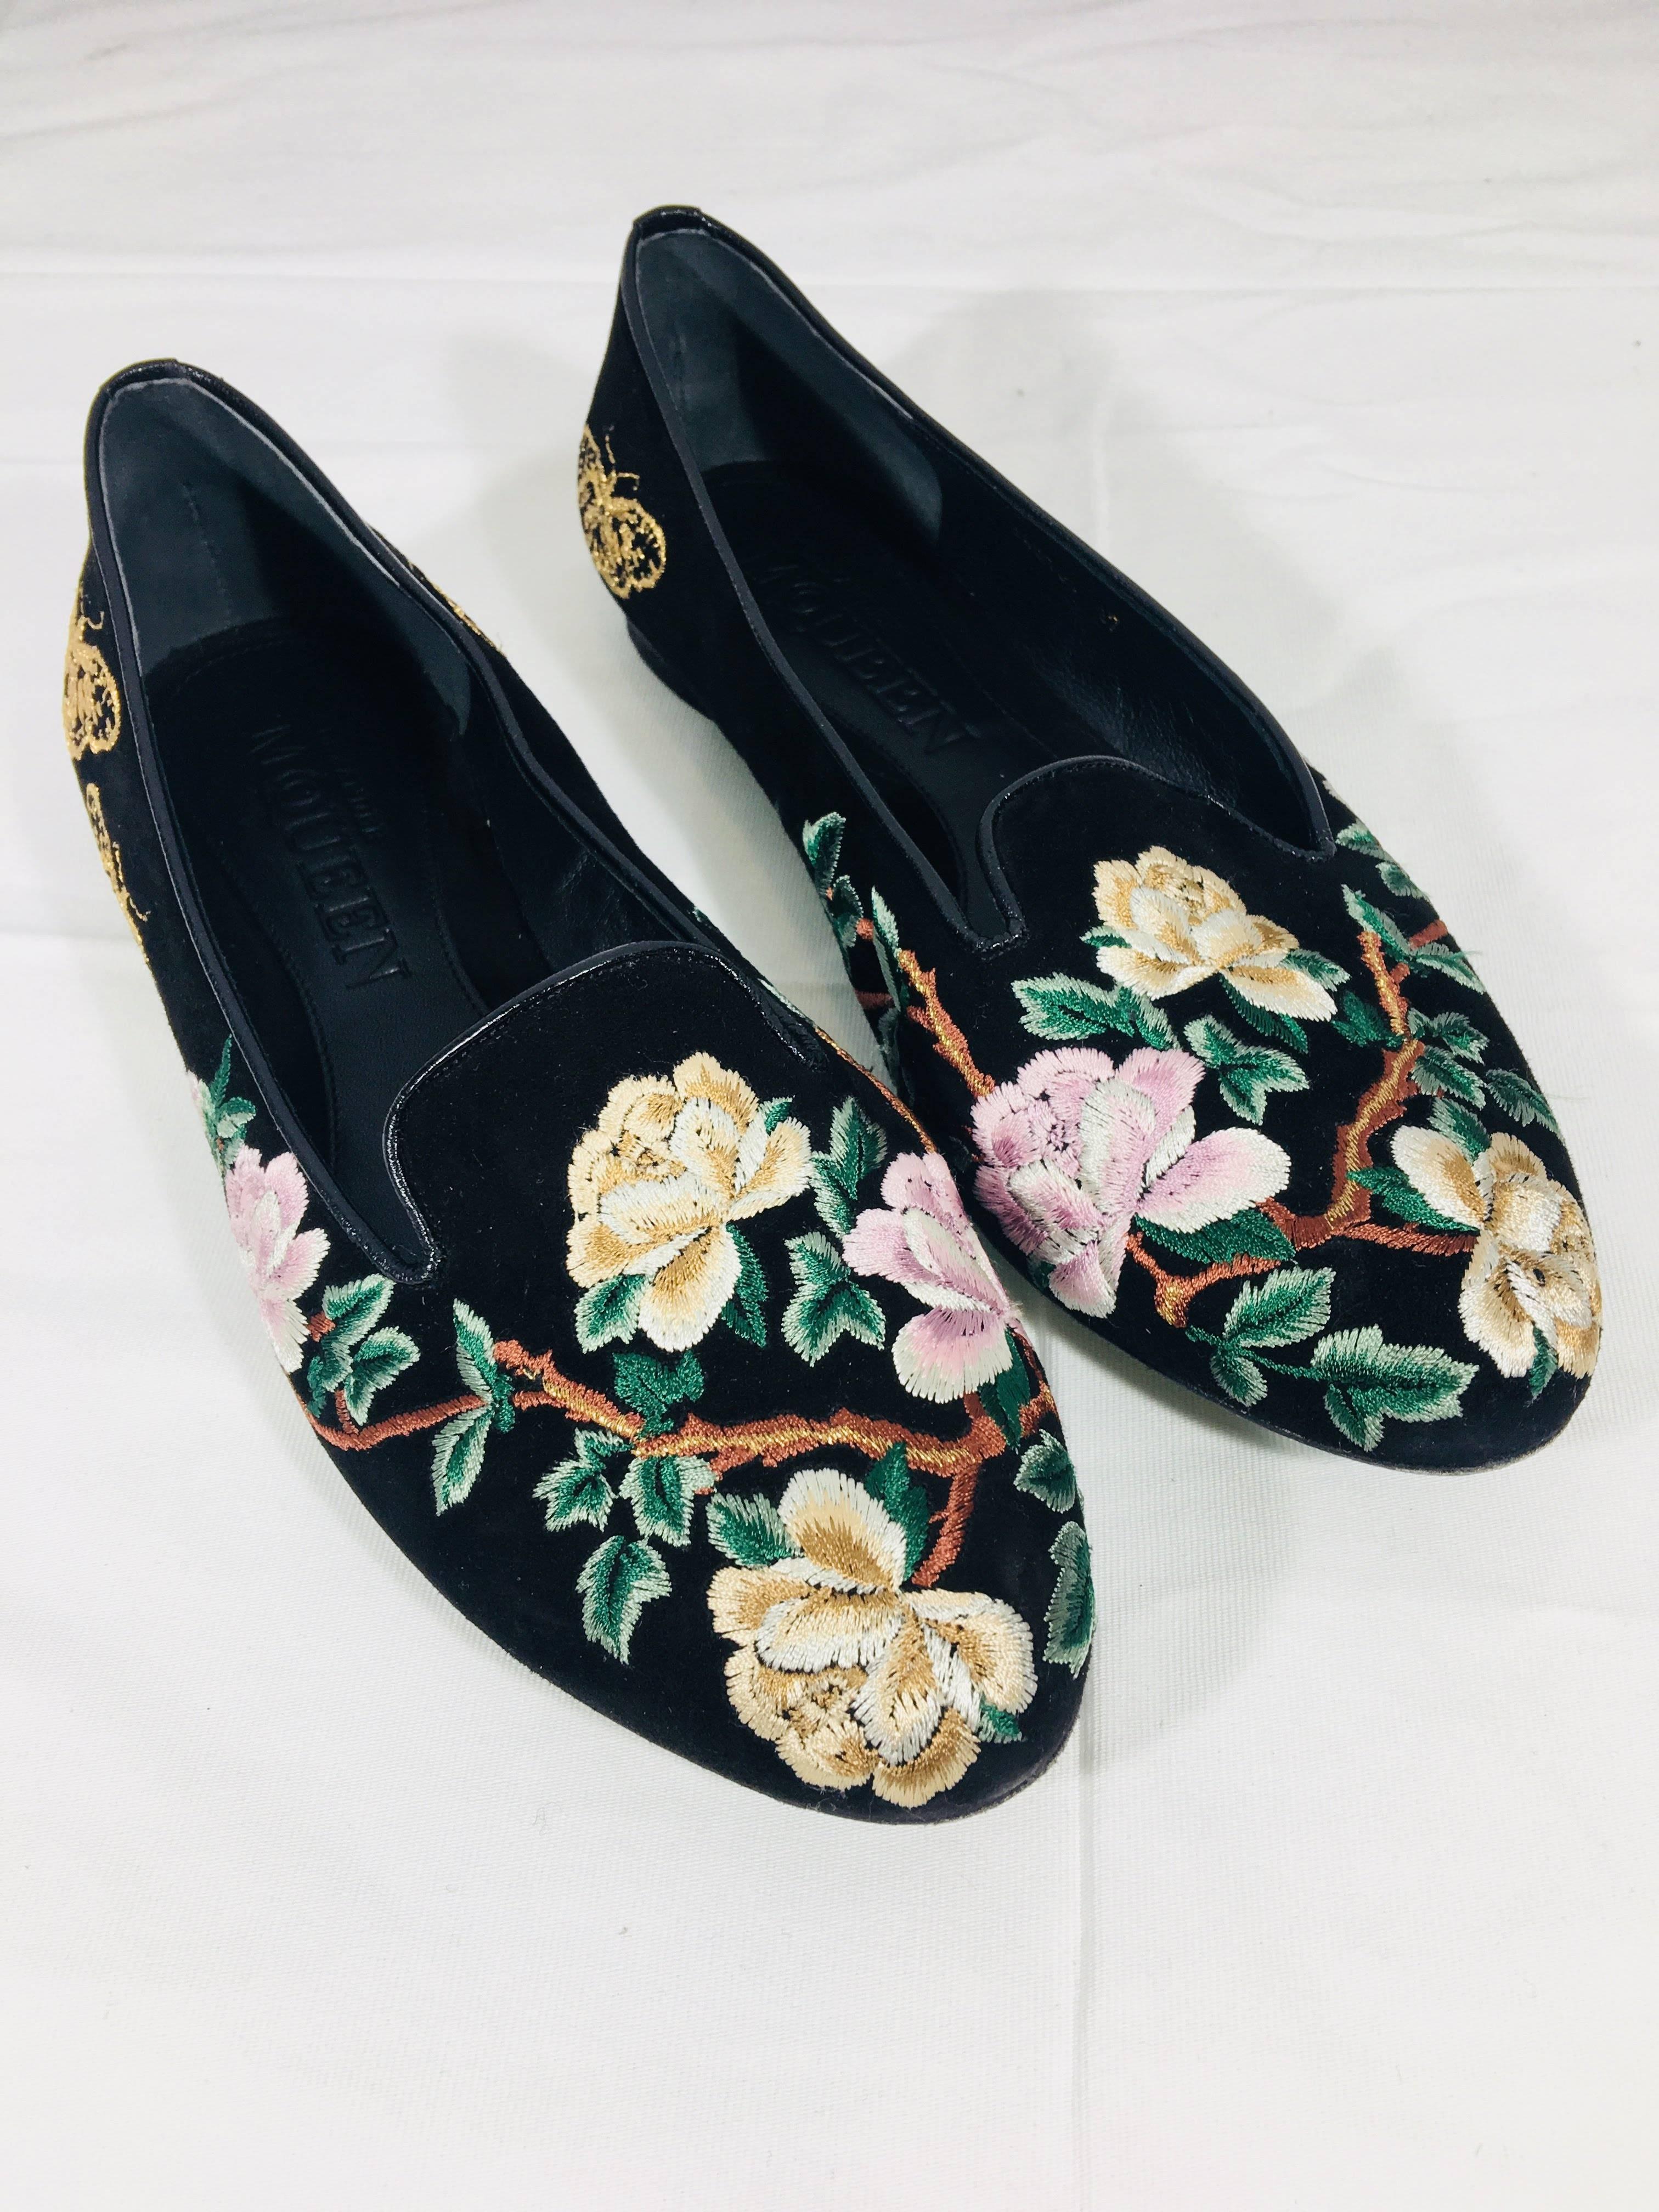 Alexander McQueen Black Velvet Loafers with Embroidered Flowers and Butterflys